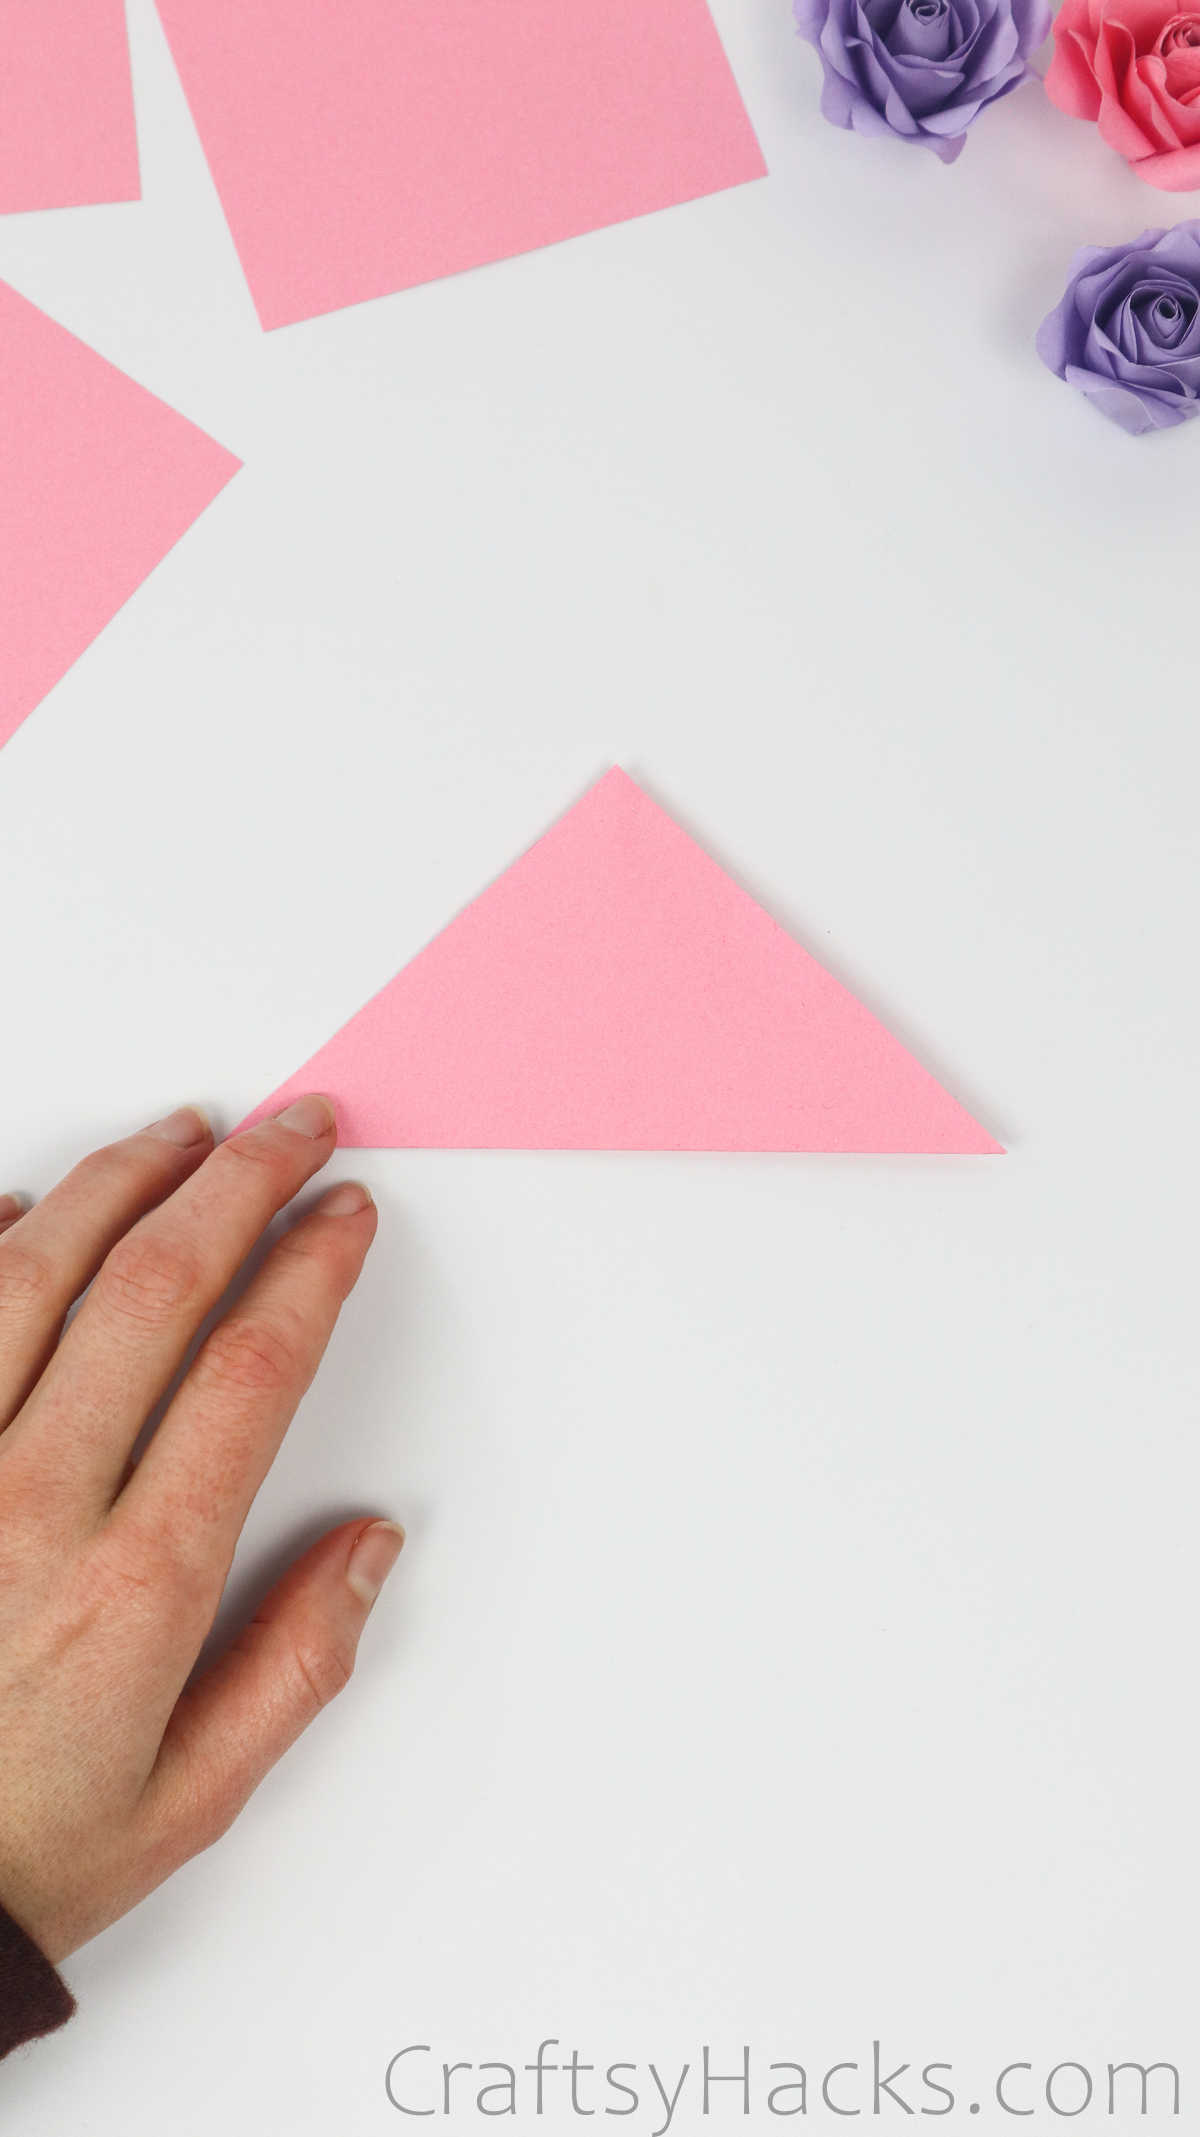 folding paper into triangle